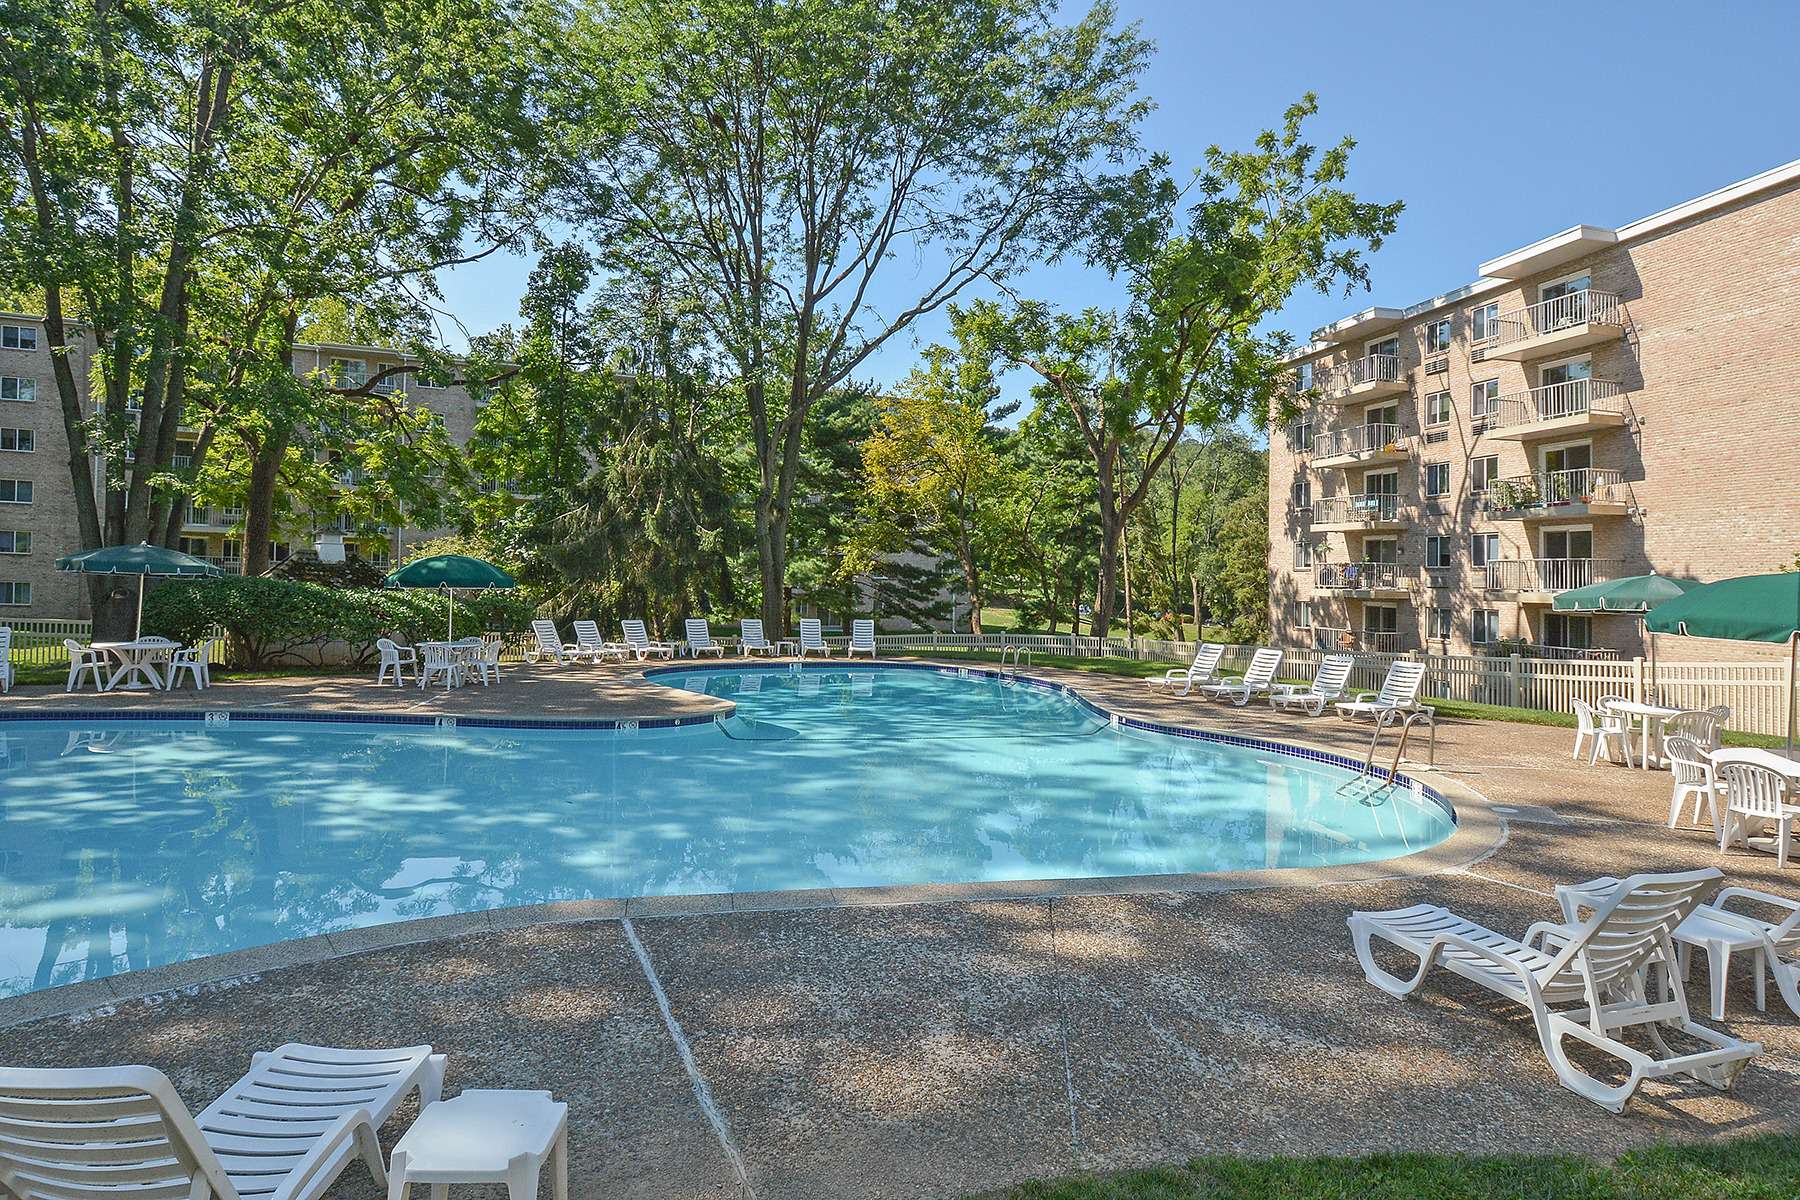 Fenced-in pool area surrounded by trees and apartment buildings.